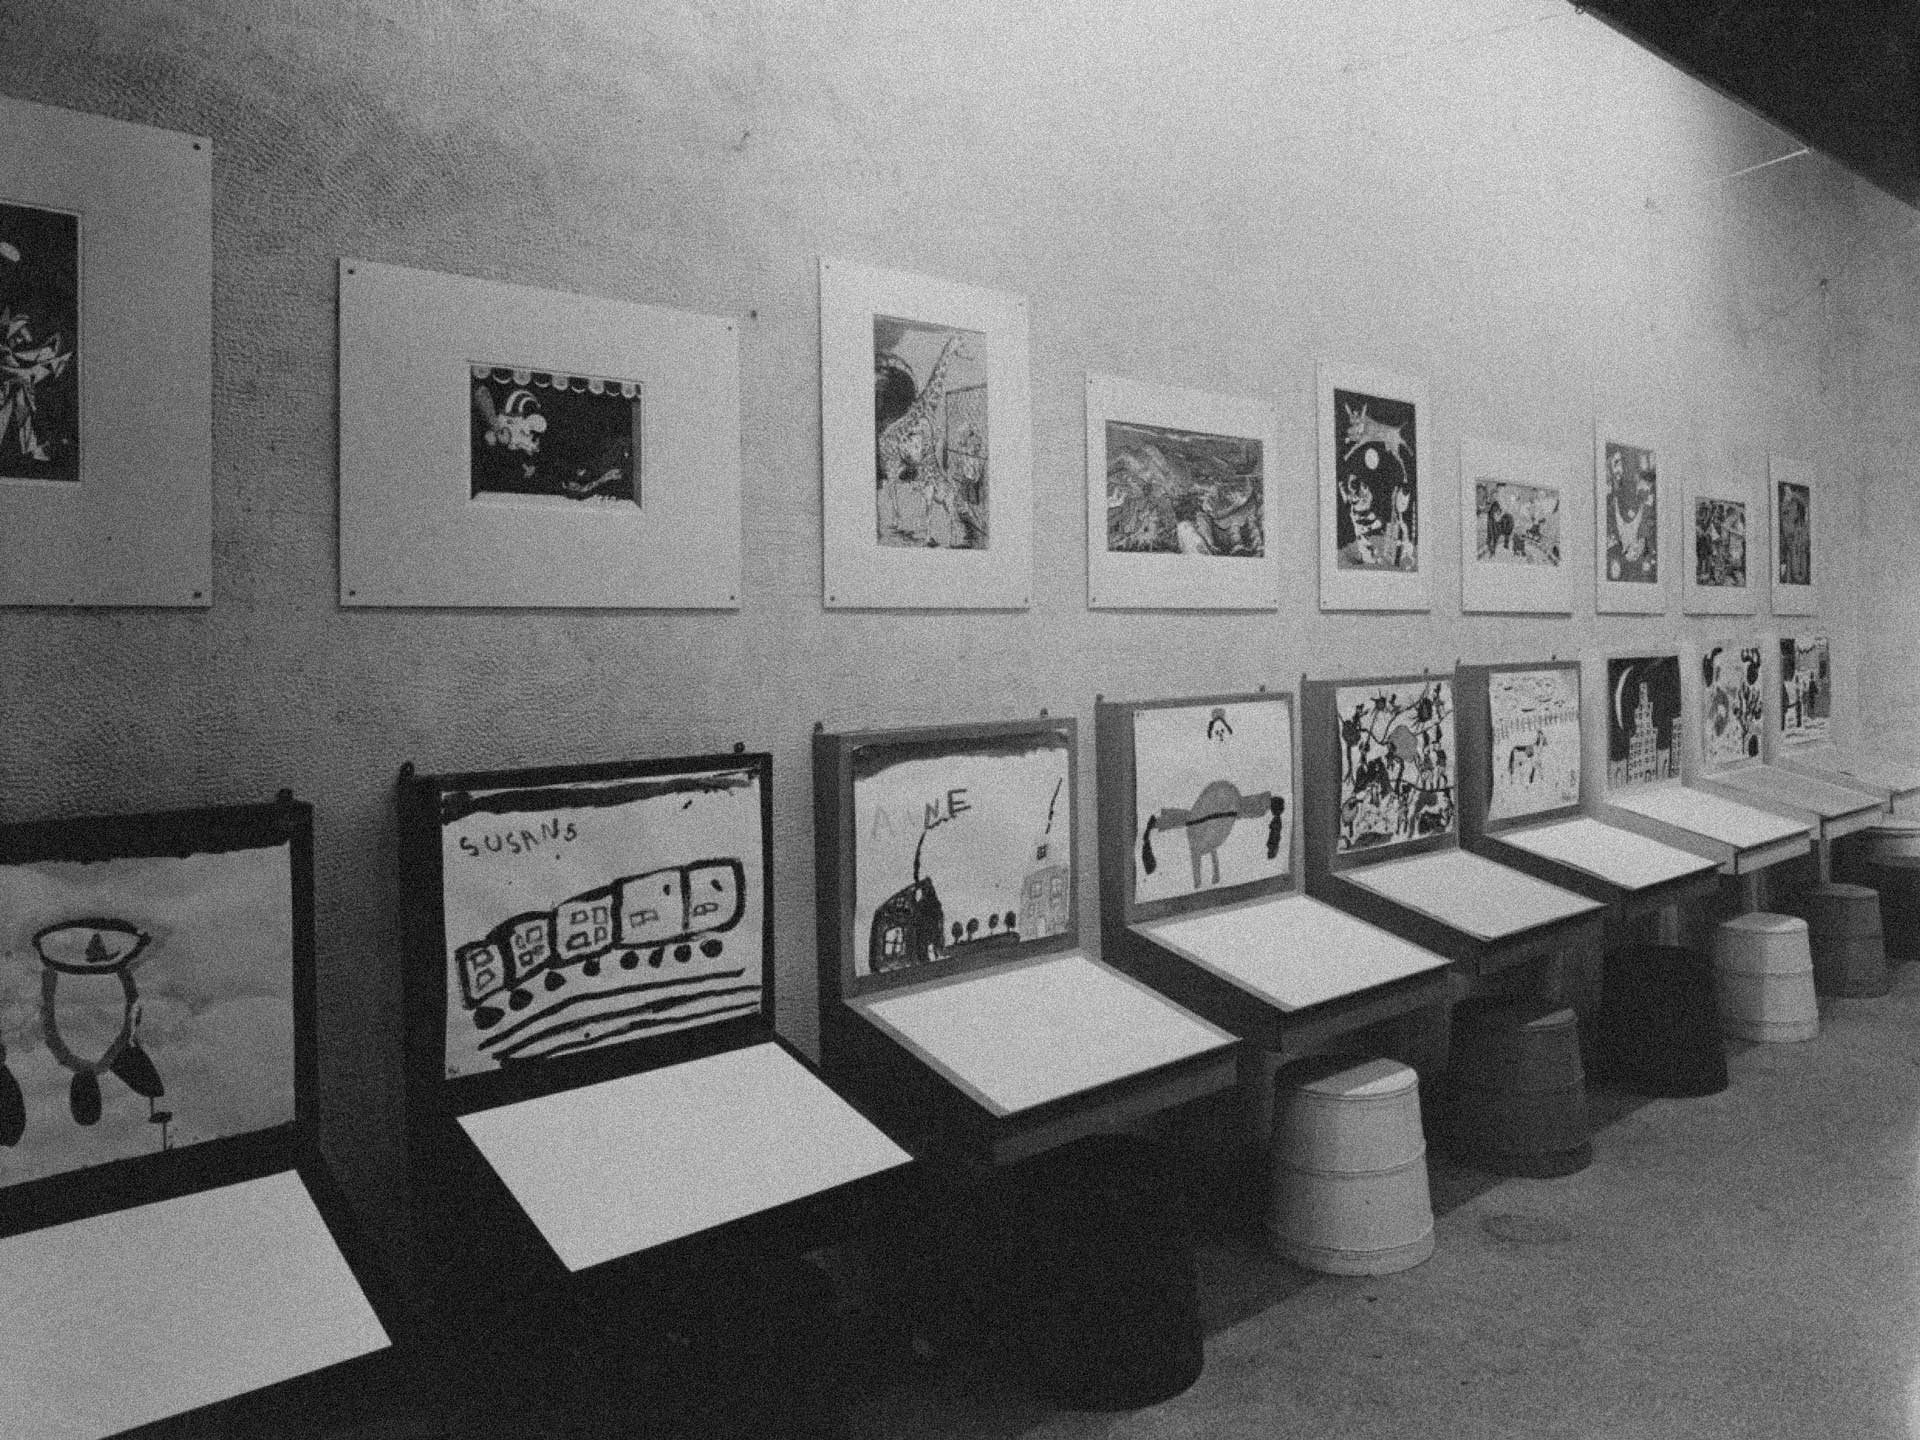 Children's art classes at MoMA. Source - MoMA Exhibition history https://www.moma.org/calendar/exhibitions/history/